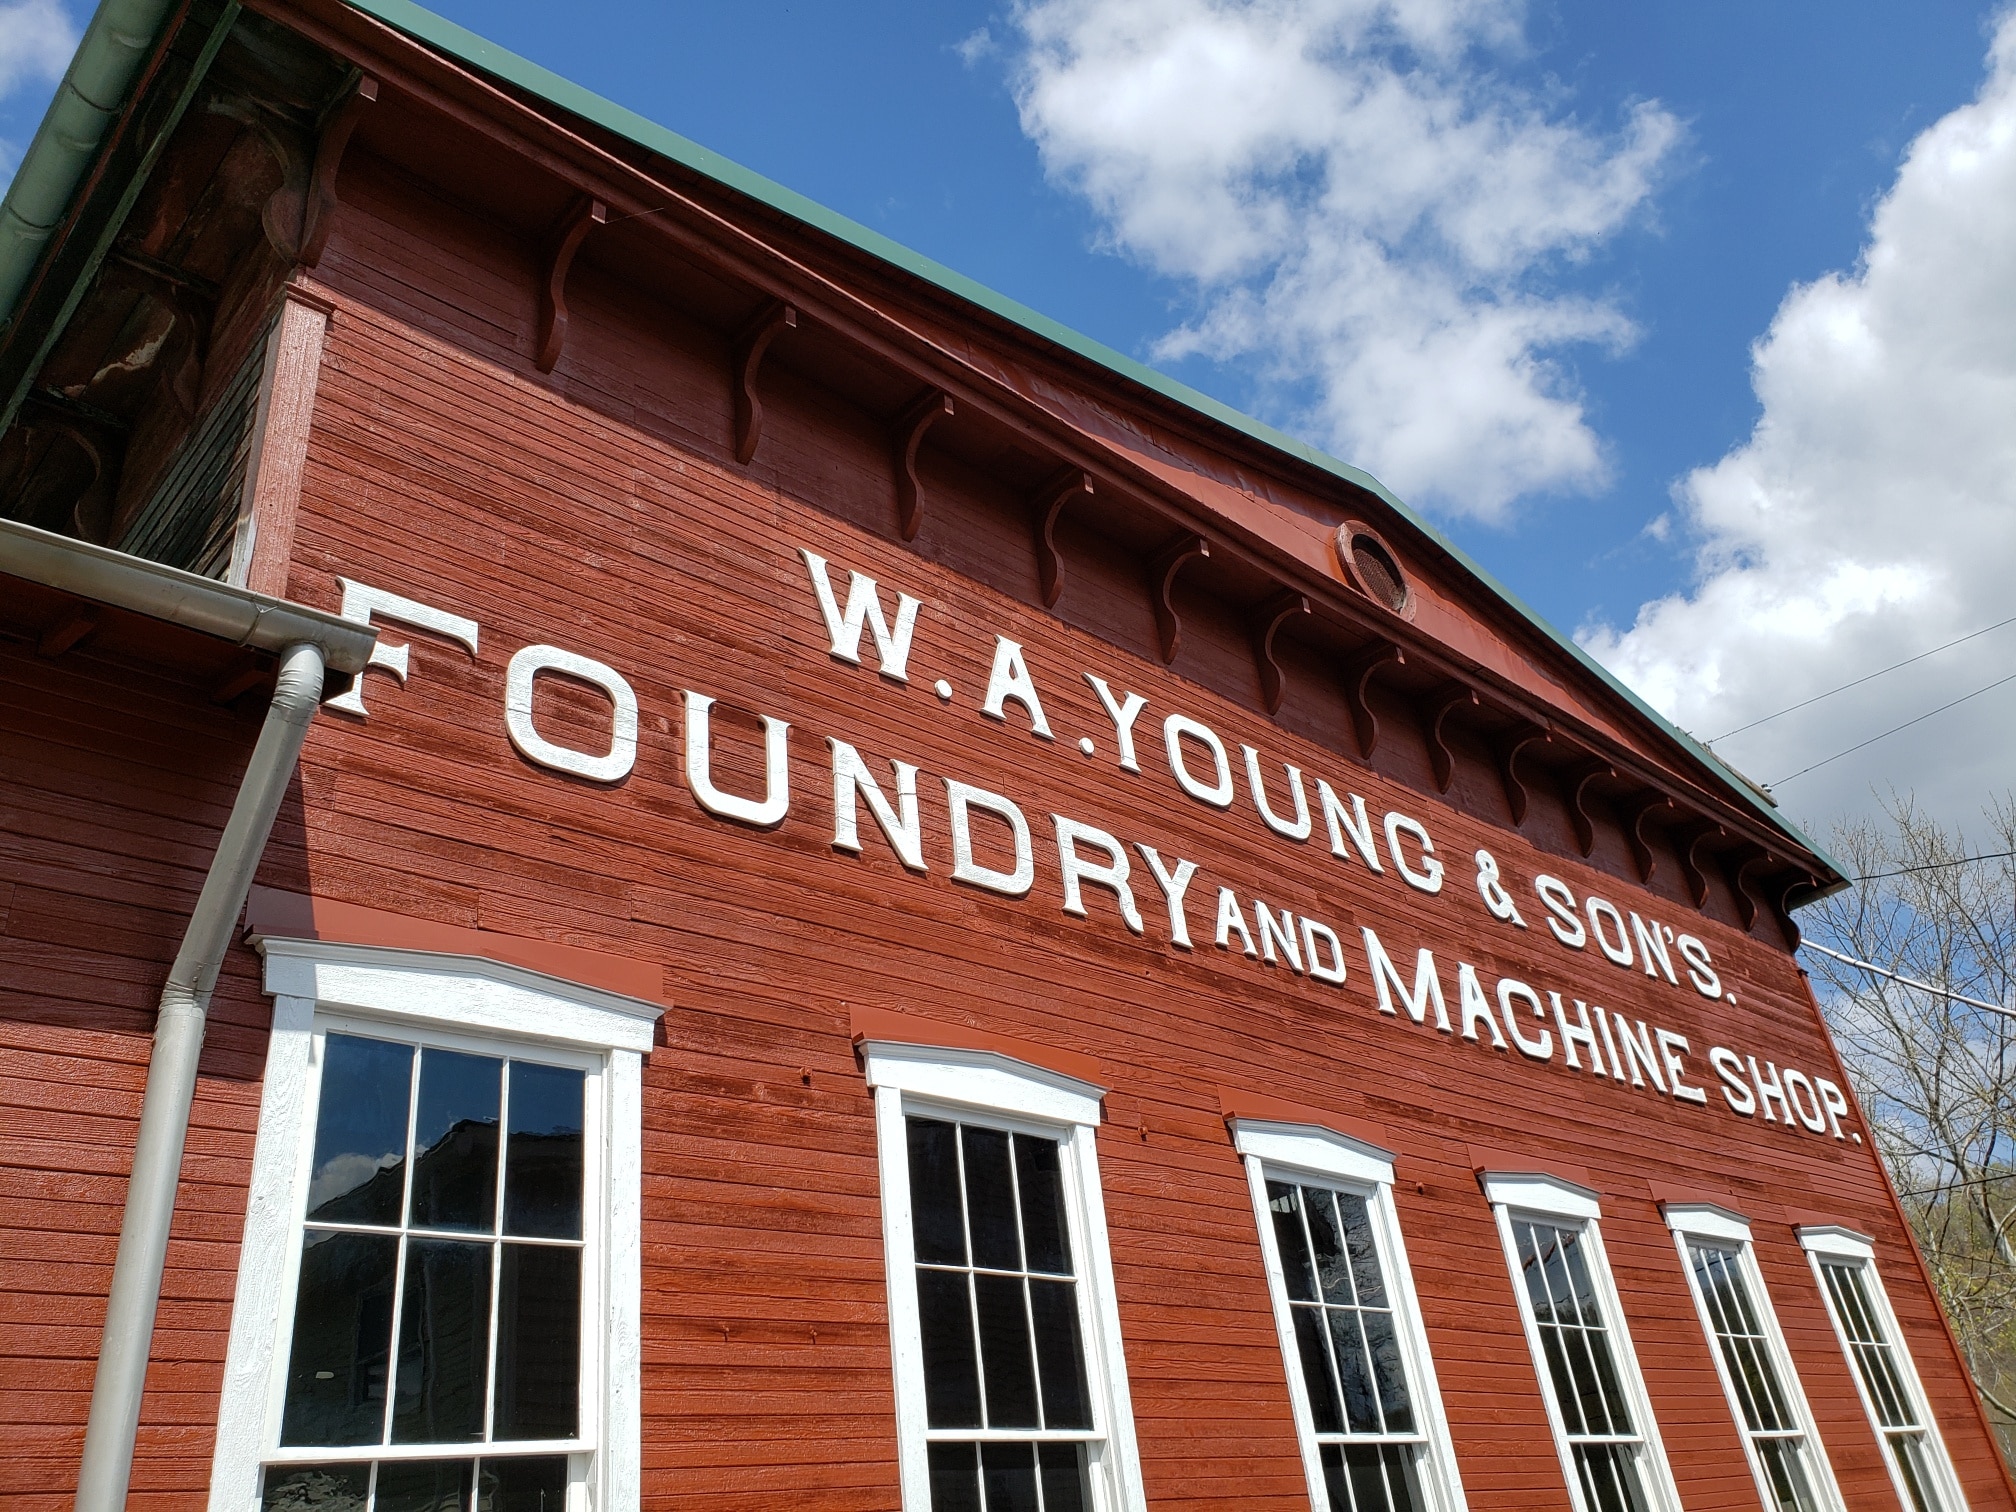 W. A. Young & Sons Foundry & Machine Shop - Visit Greene County